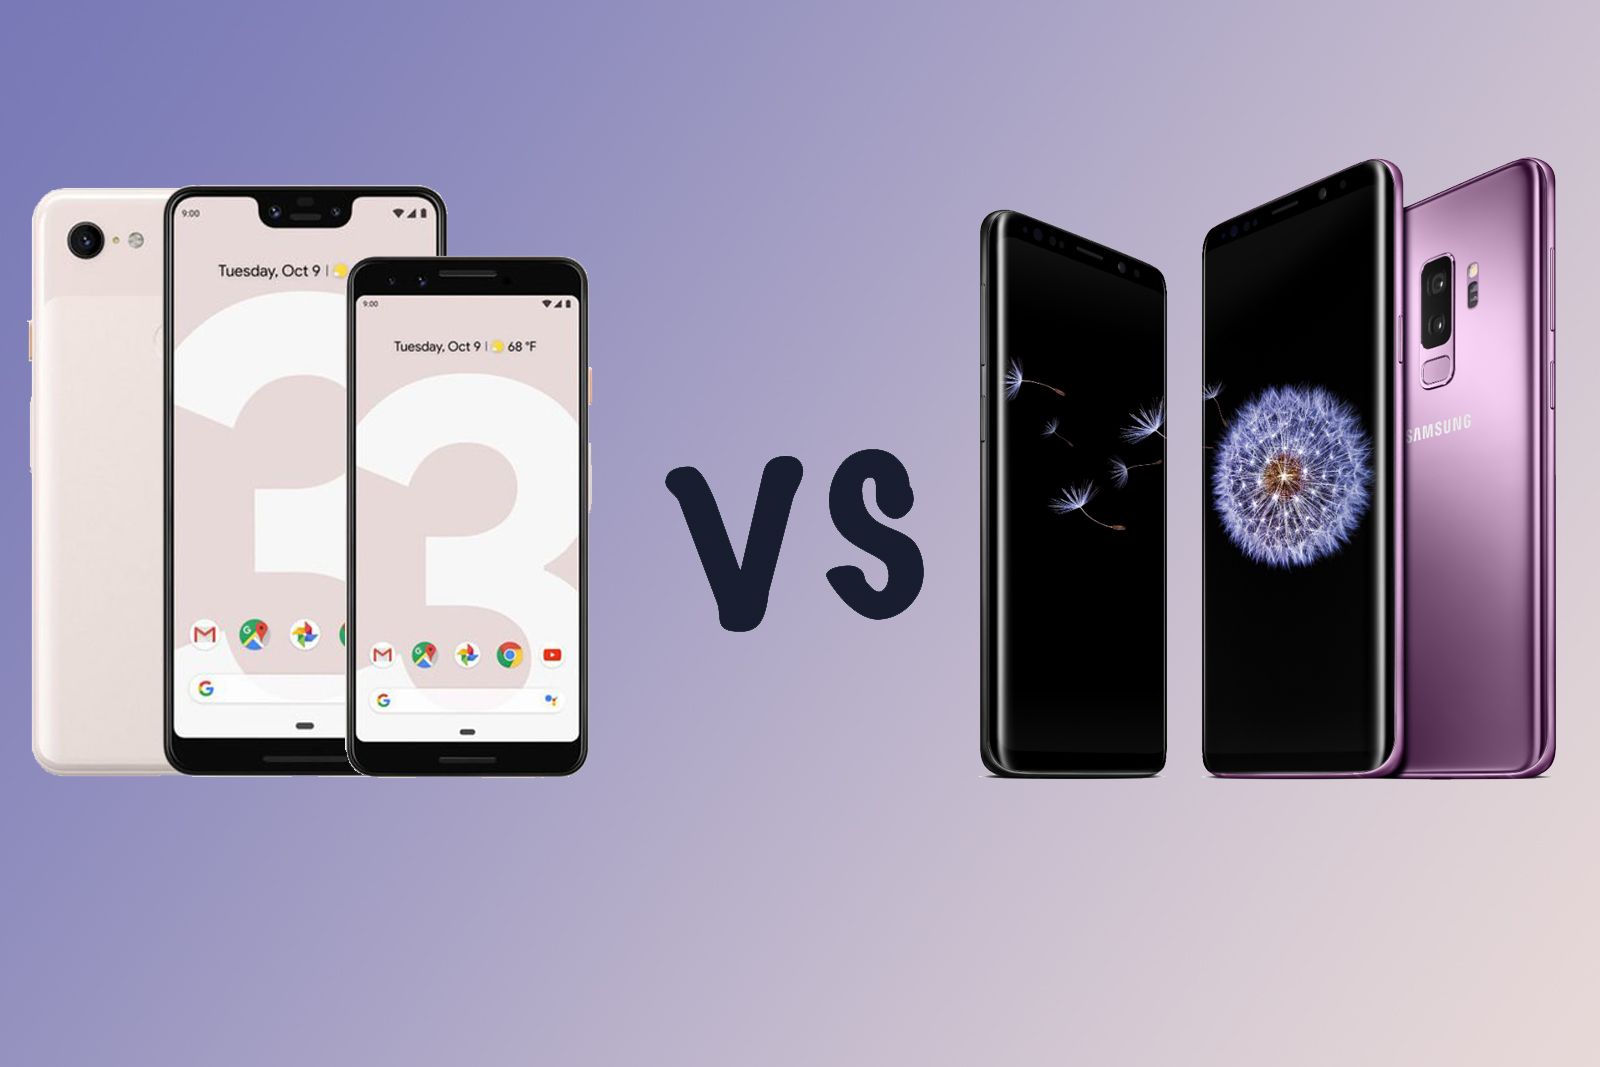 Google Pixel 3 Vs. Samsung Galaxy S9: Which Should You Buy